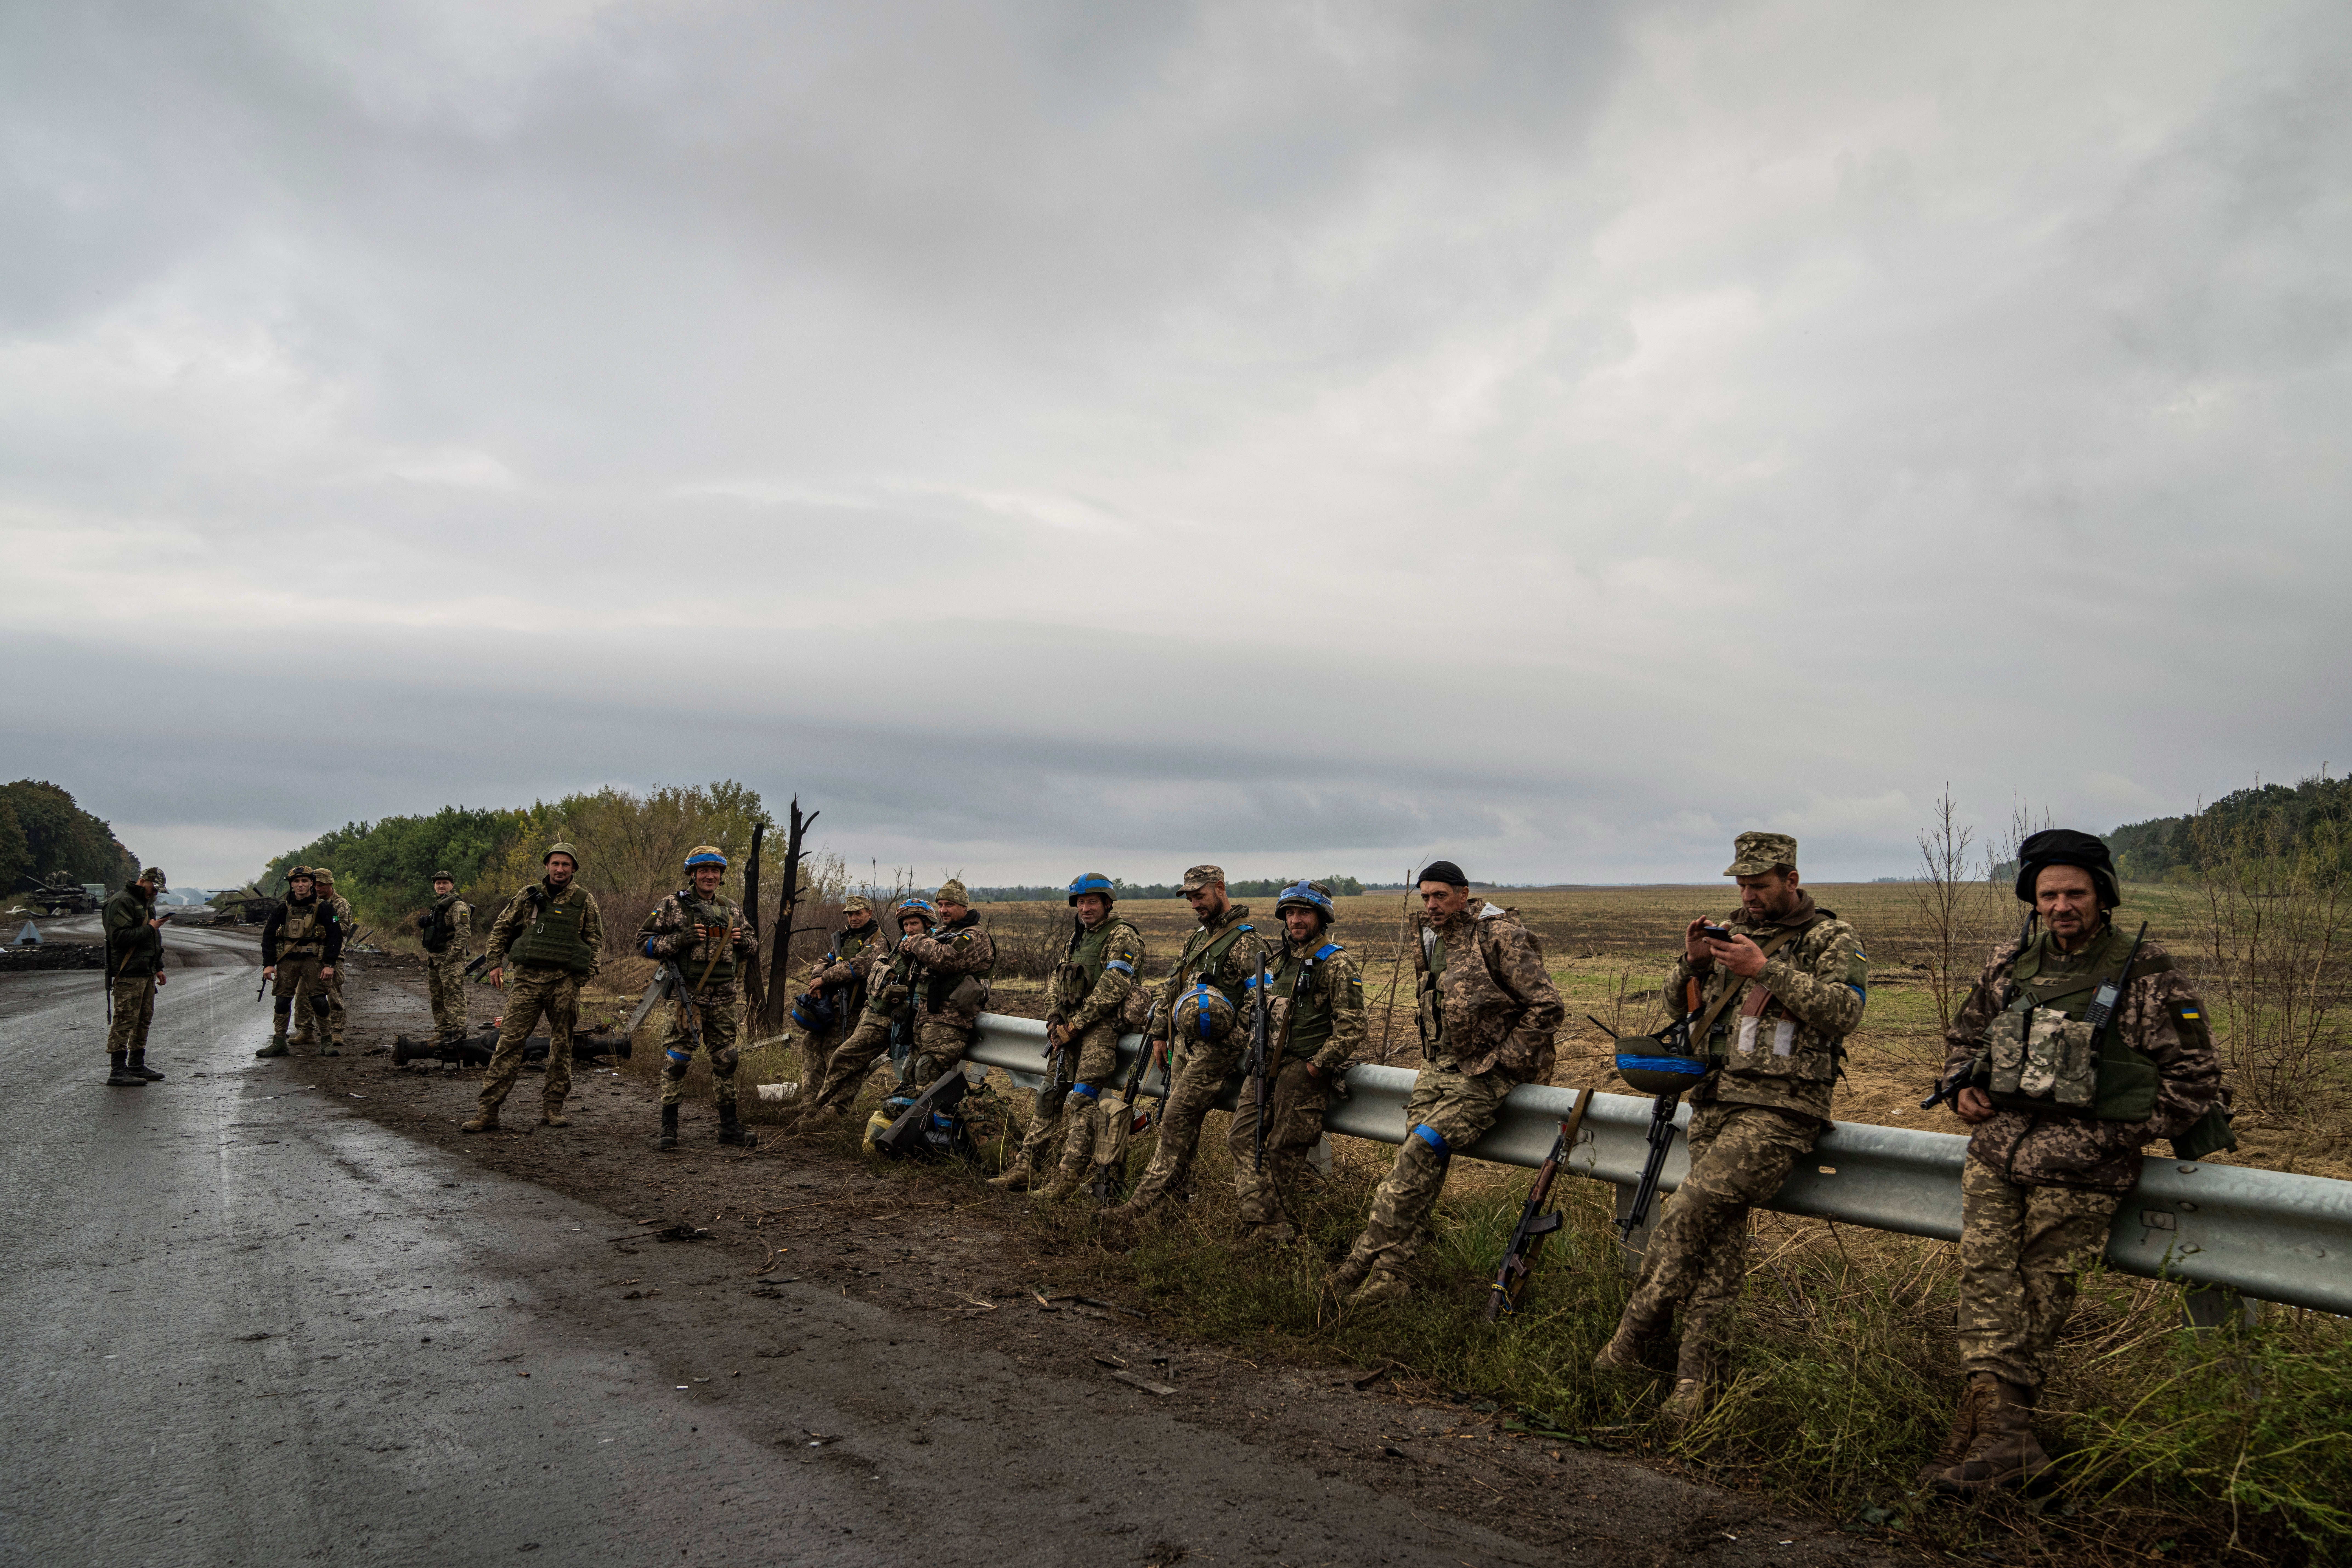 Ukrainian servicemen rest at a former Russian position in the recently retaken area of Izium